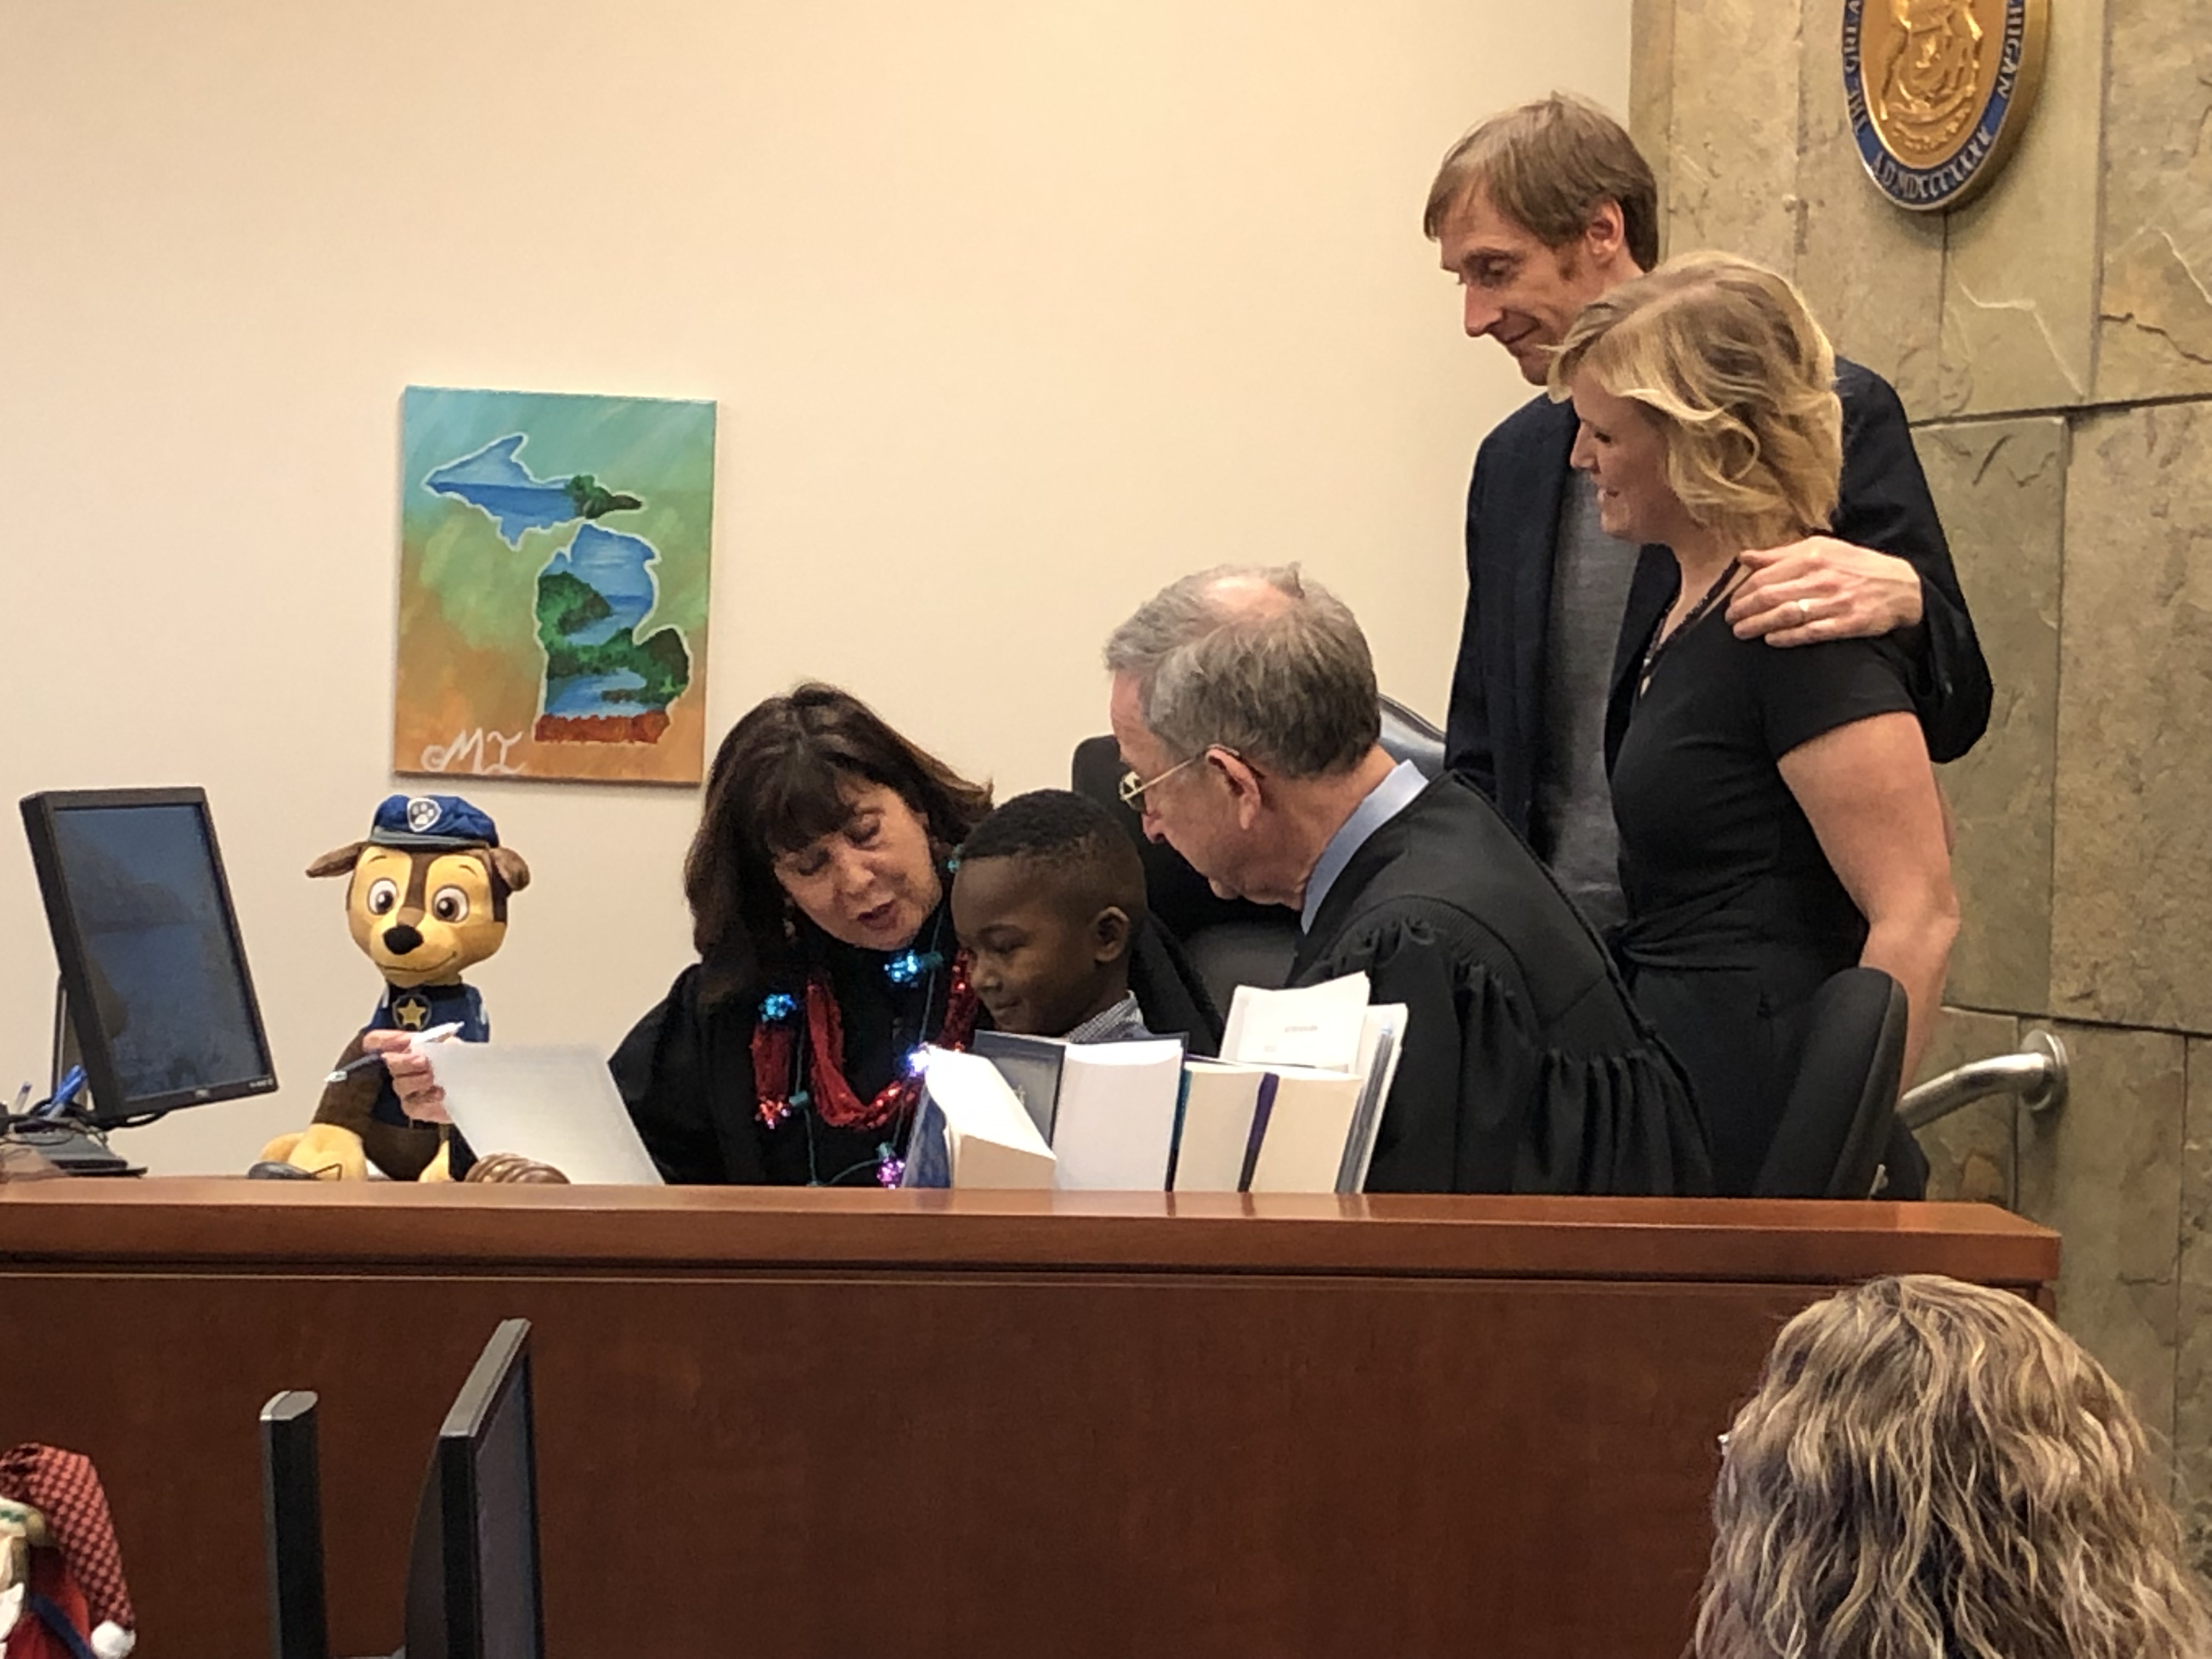 Michael's adoption at a Kent County court